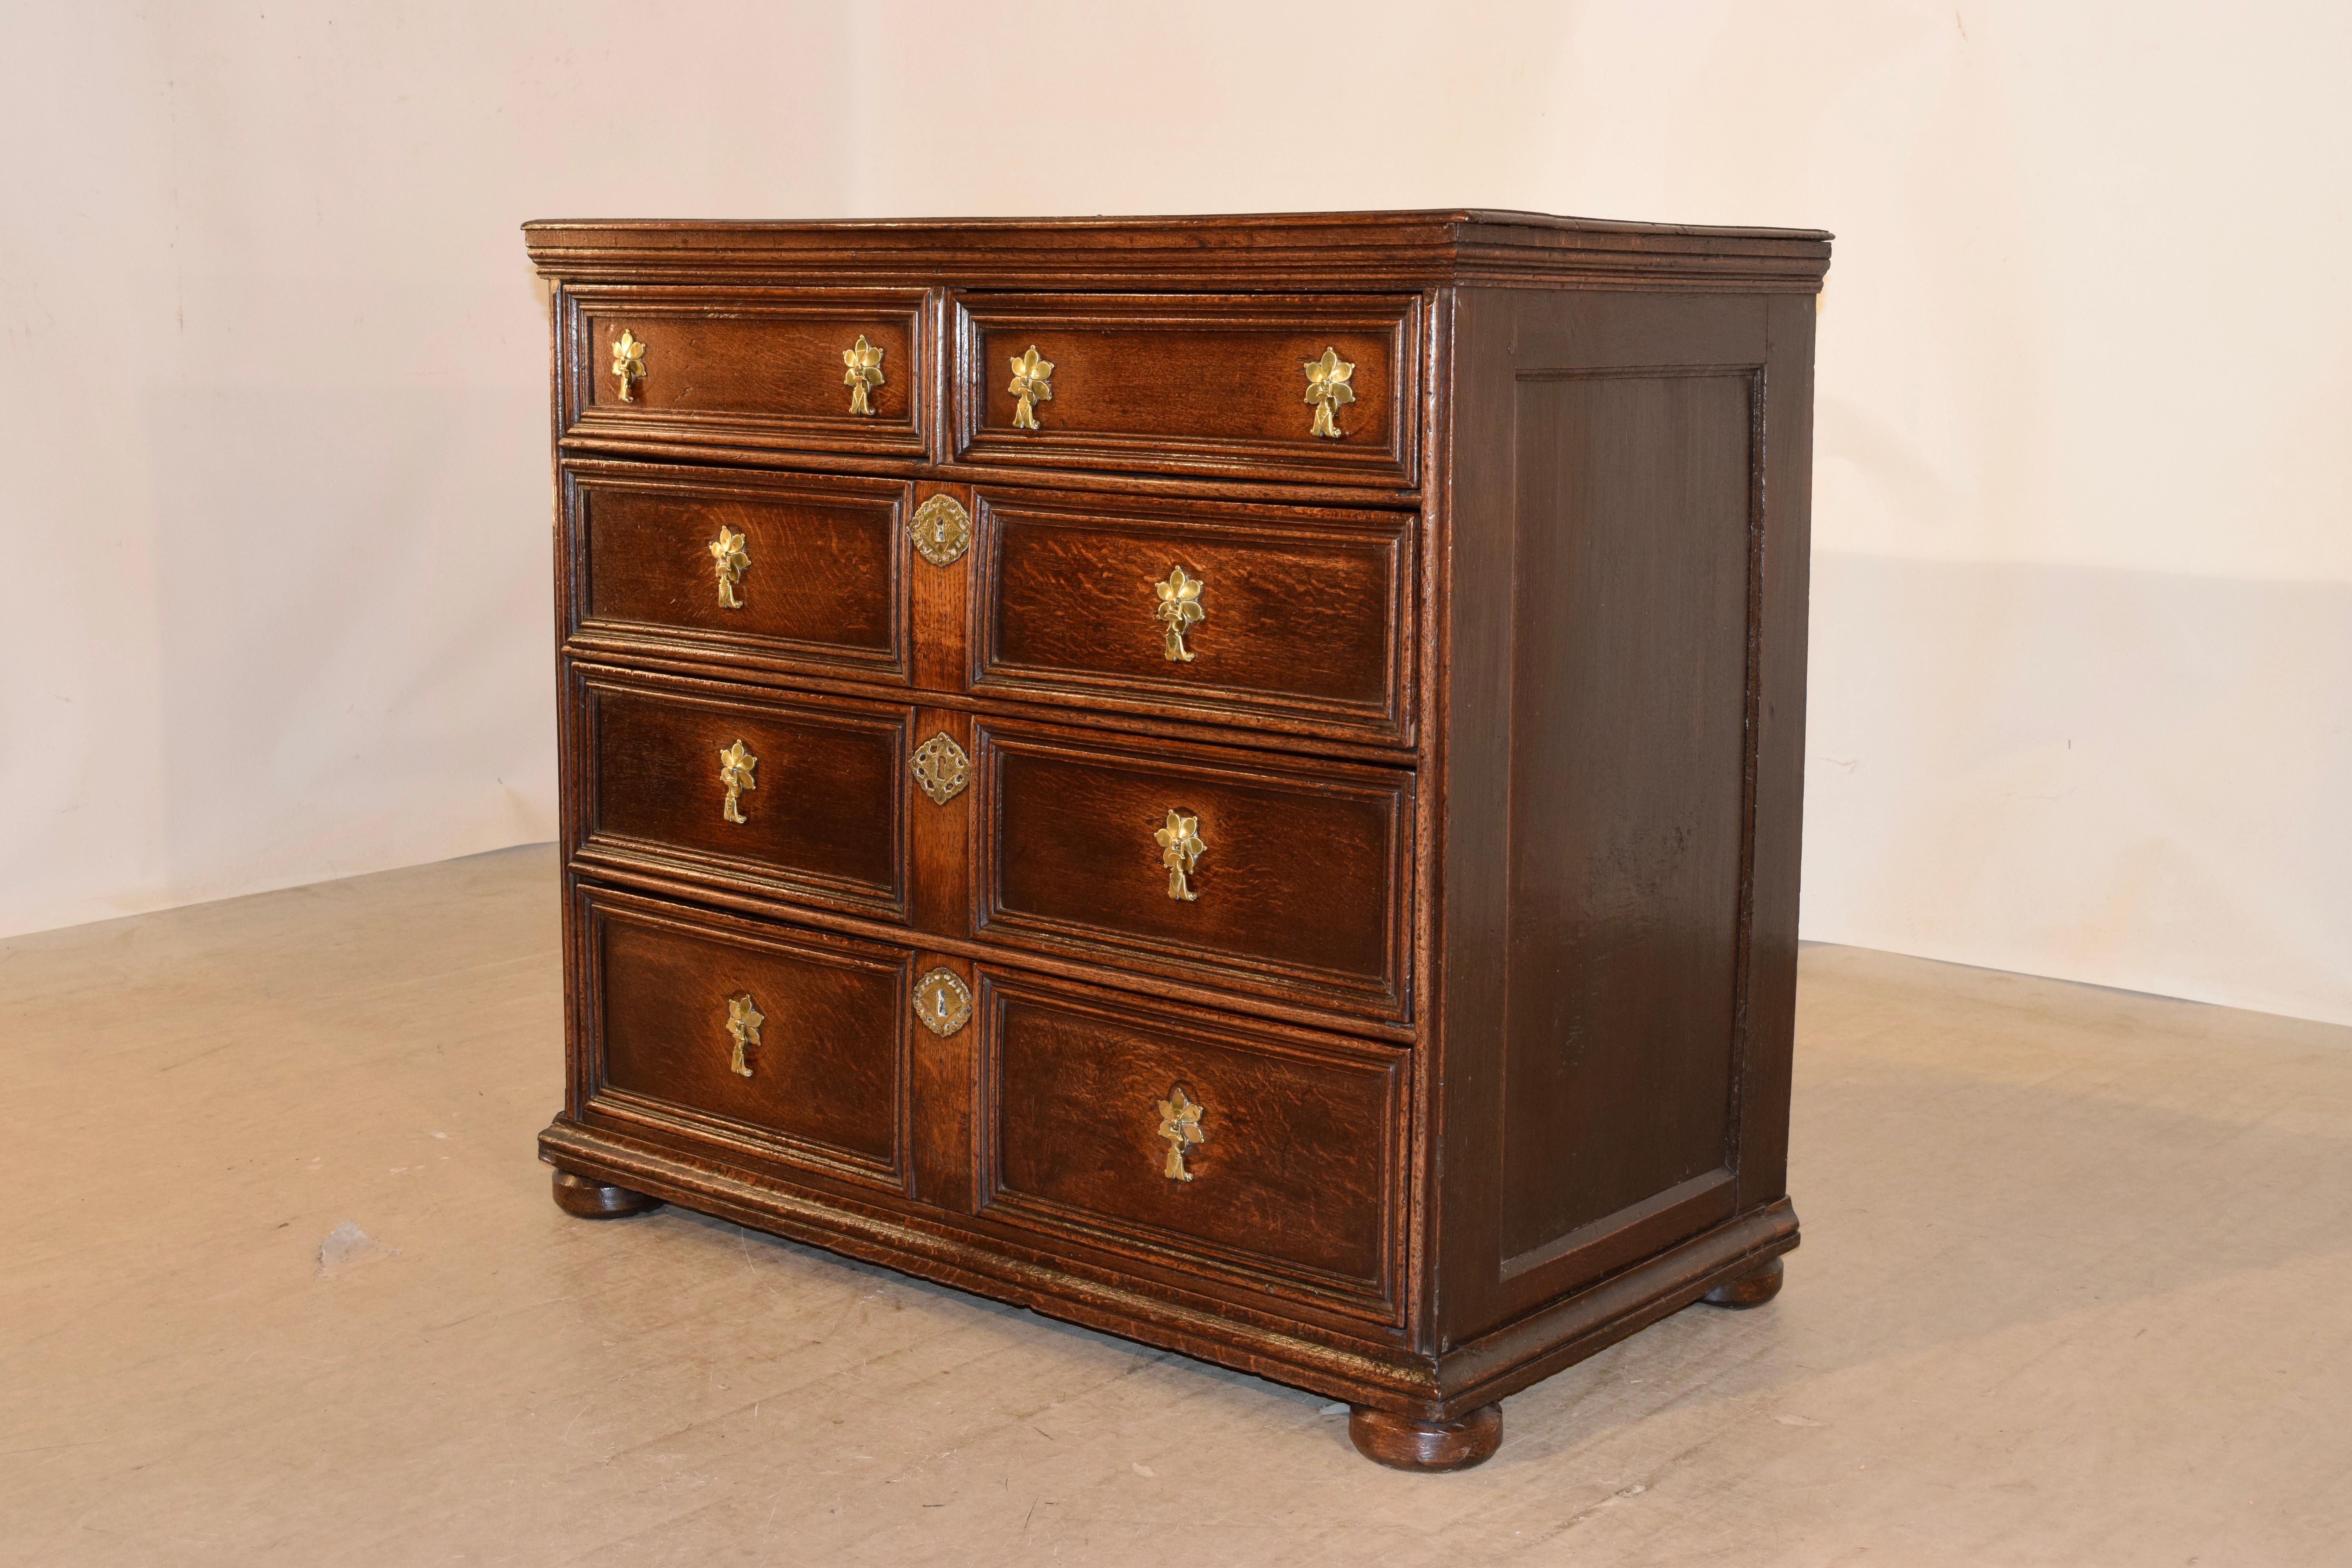 18th Century Paneled Chest of Drawers In Good Condition For Sale In High Point, NC